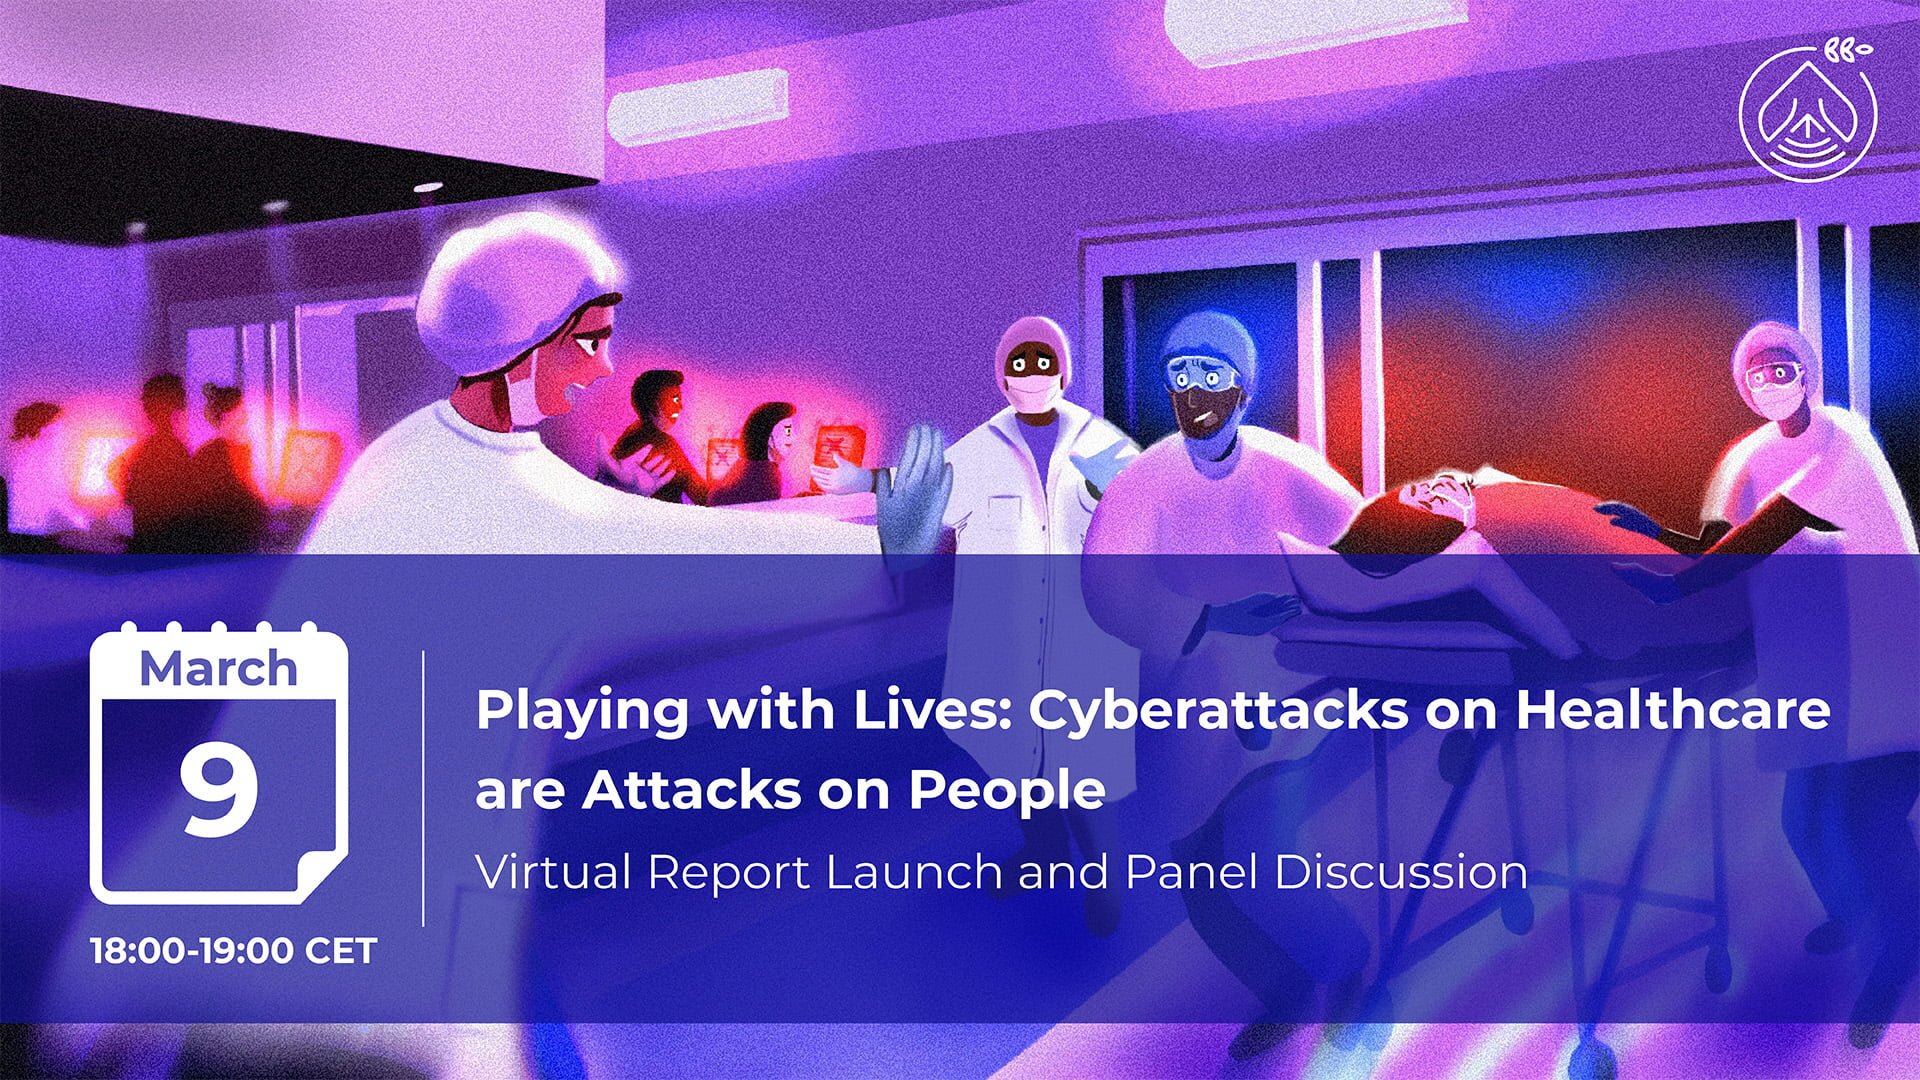 Playing with Lives: Cyberattacks on Healthcare are Attacks on People